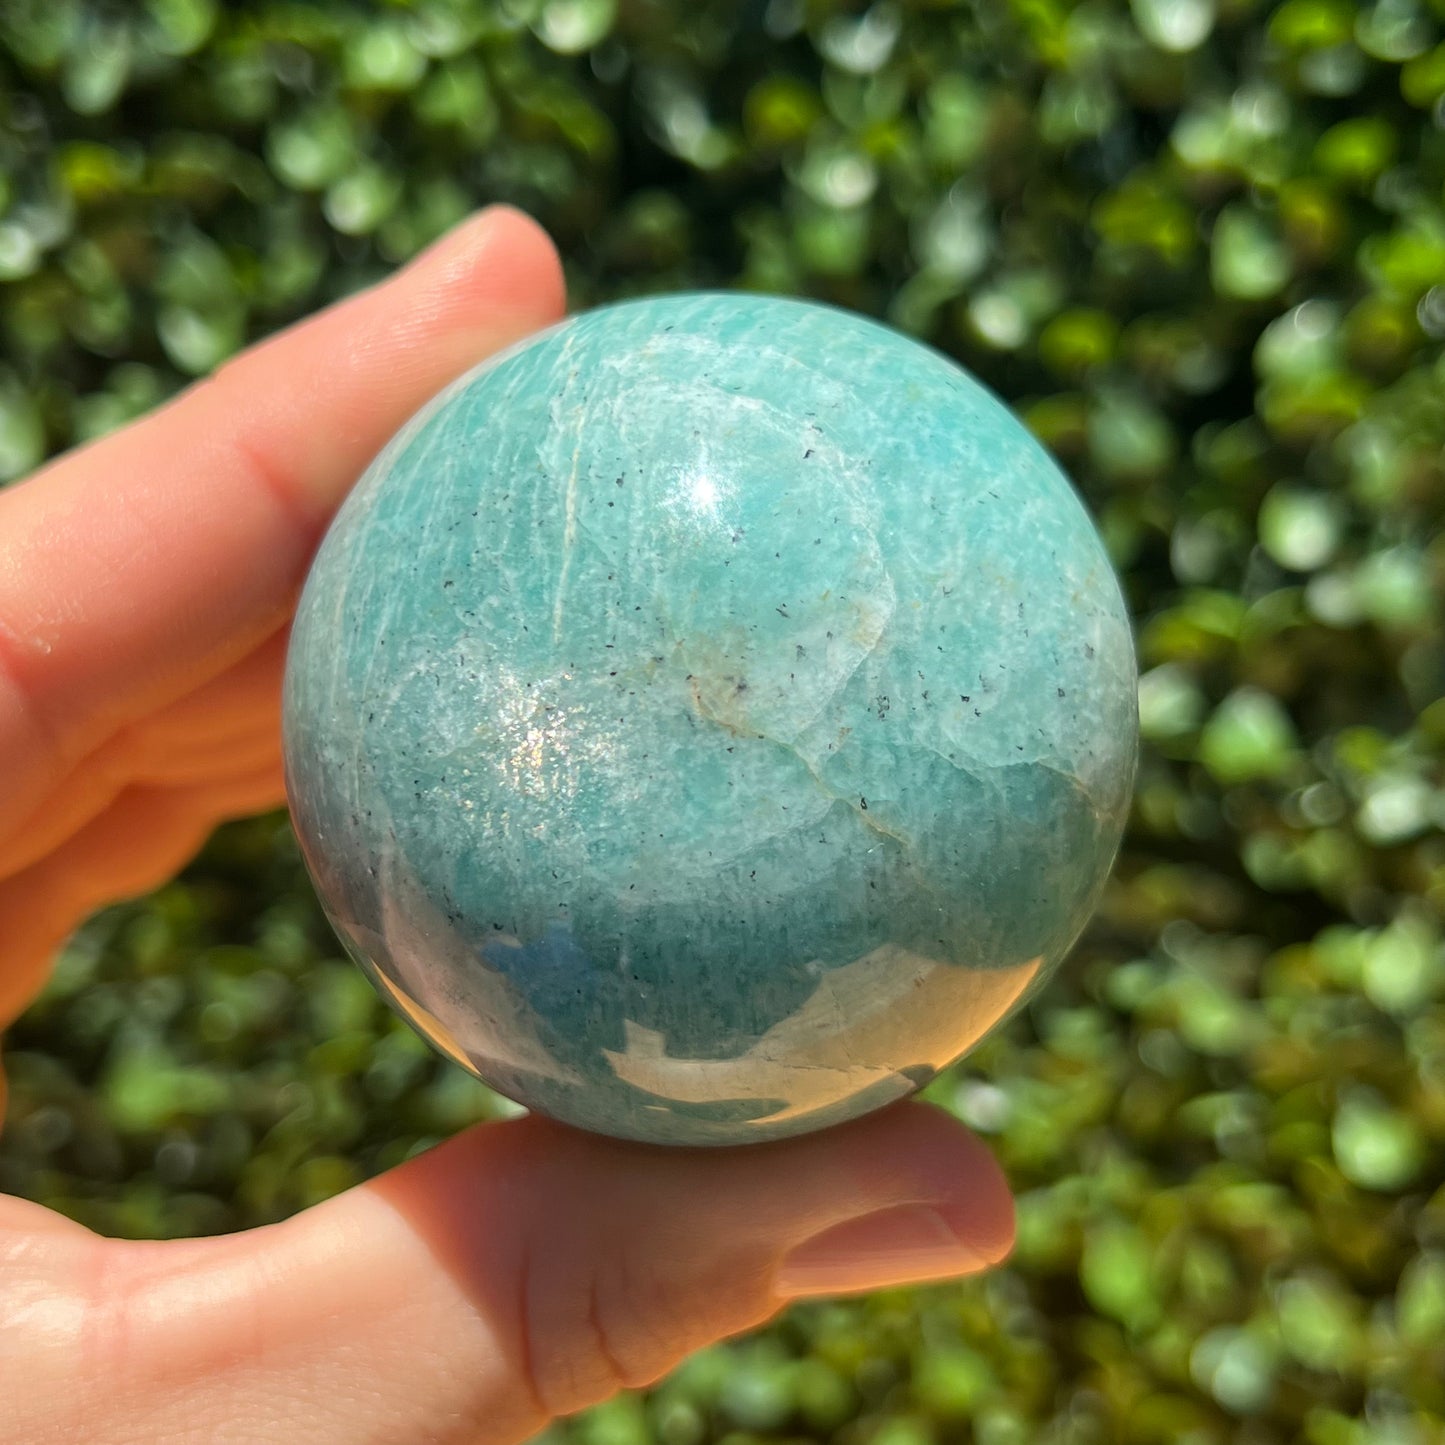 Amazonite Crystal Sphere With Smokey Inclusion